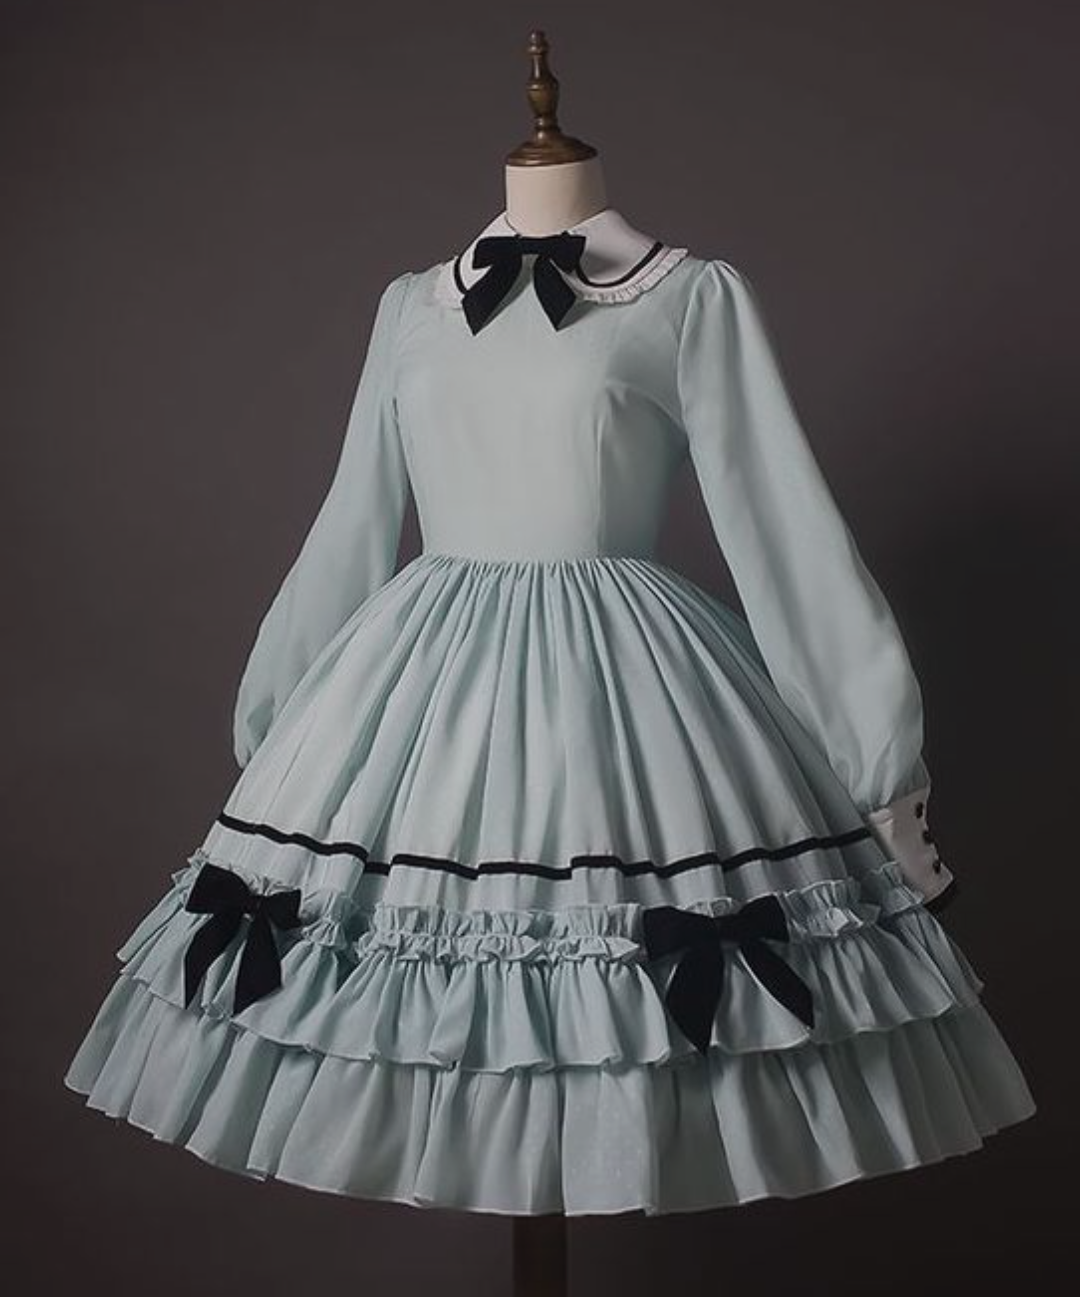 Pale blue dress with three black bows